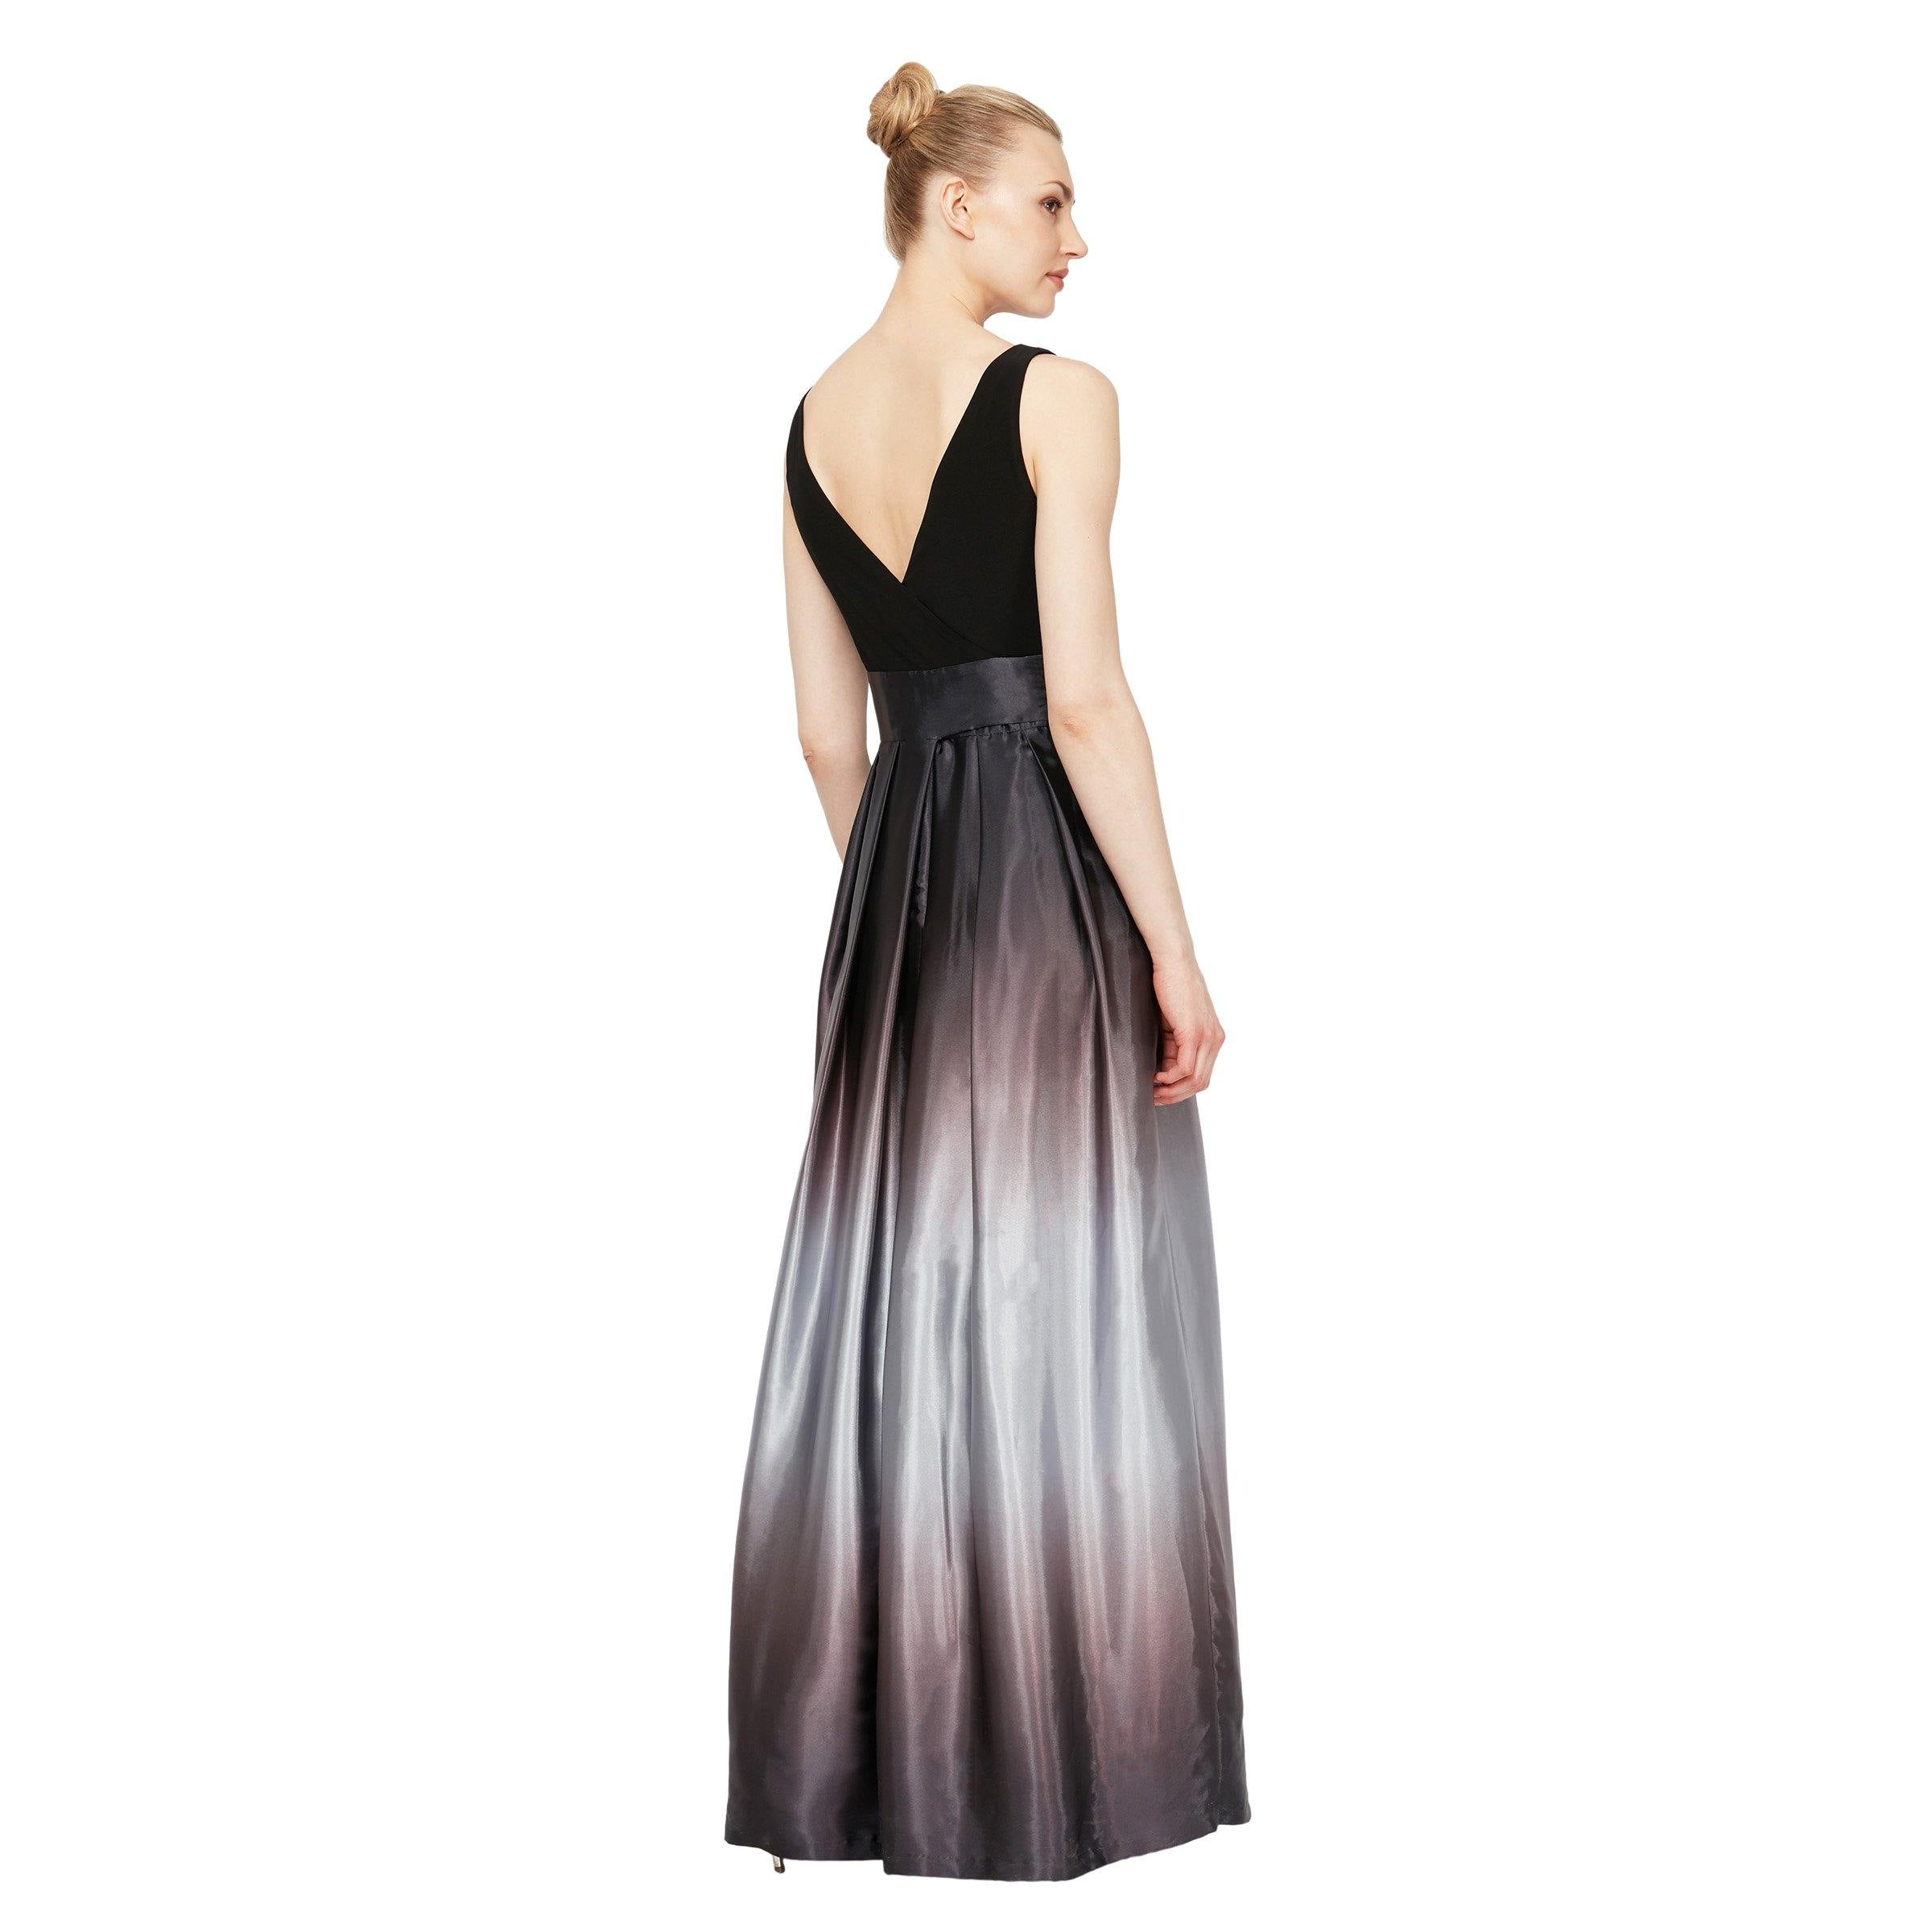 SL Fashions Ombre Long Party Dress 119435M - The Dress Outlet